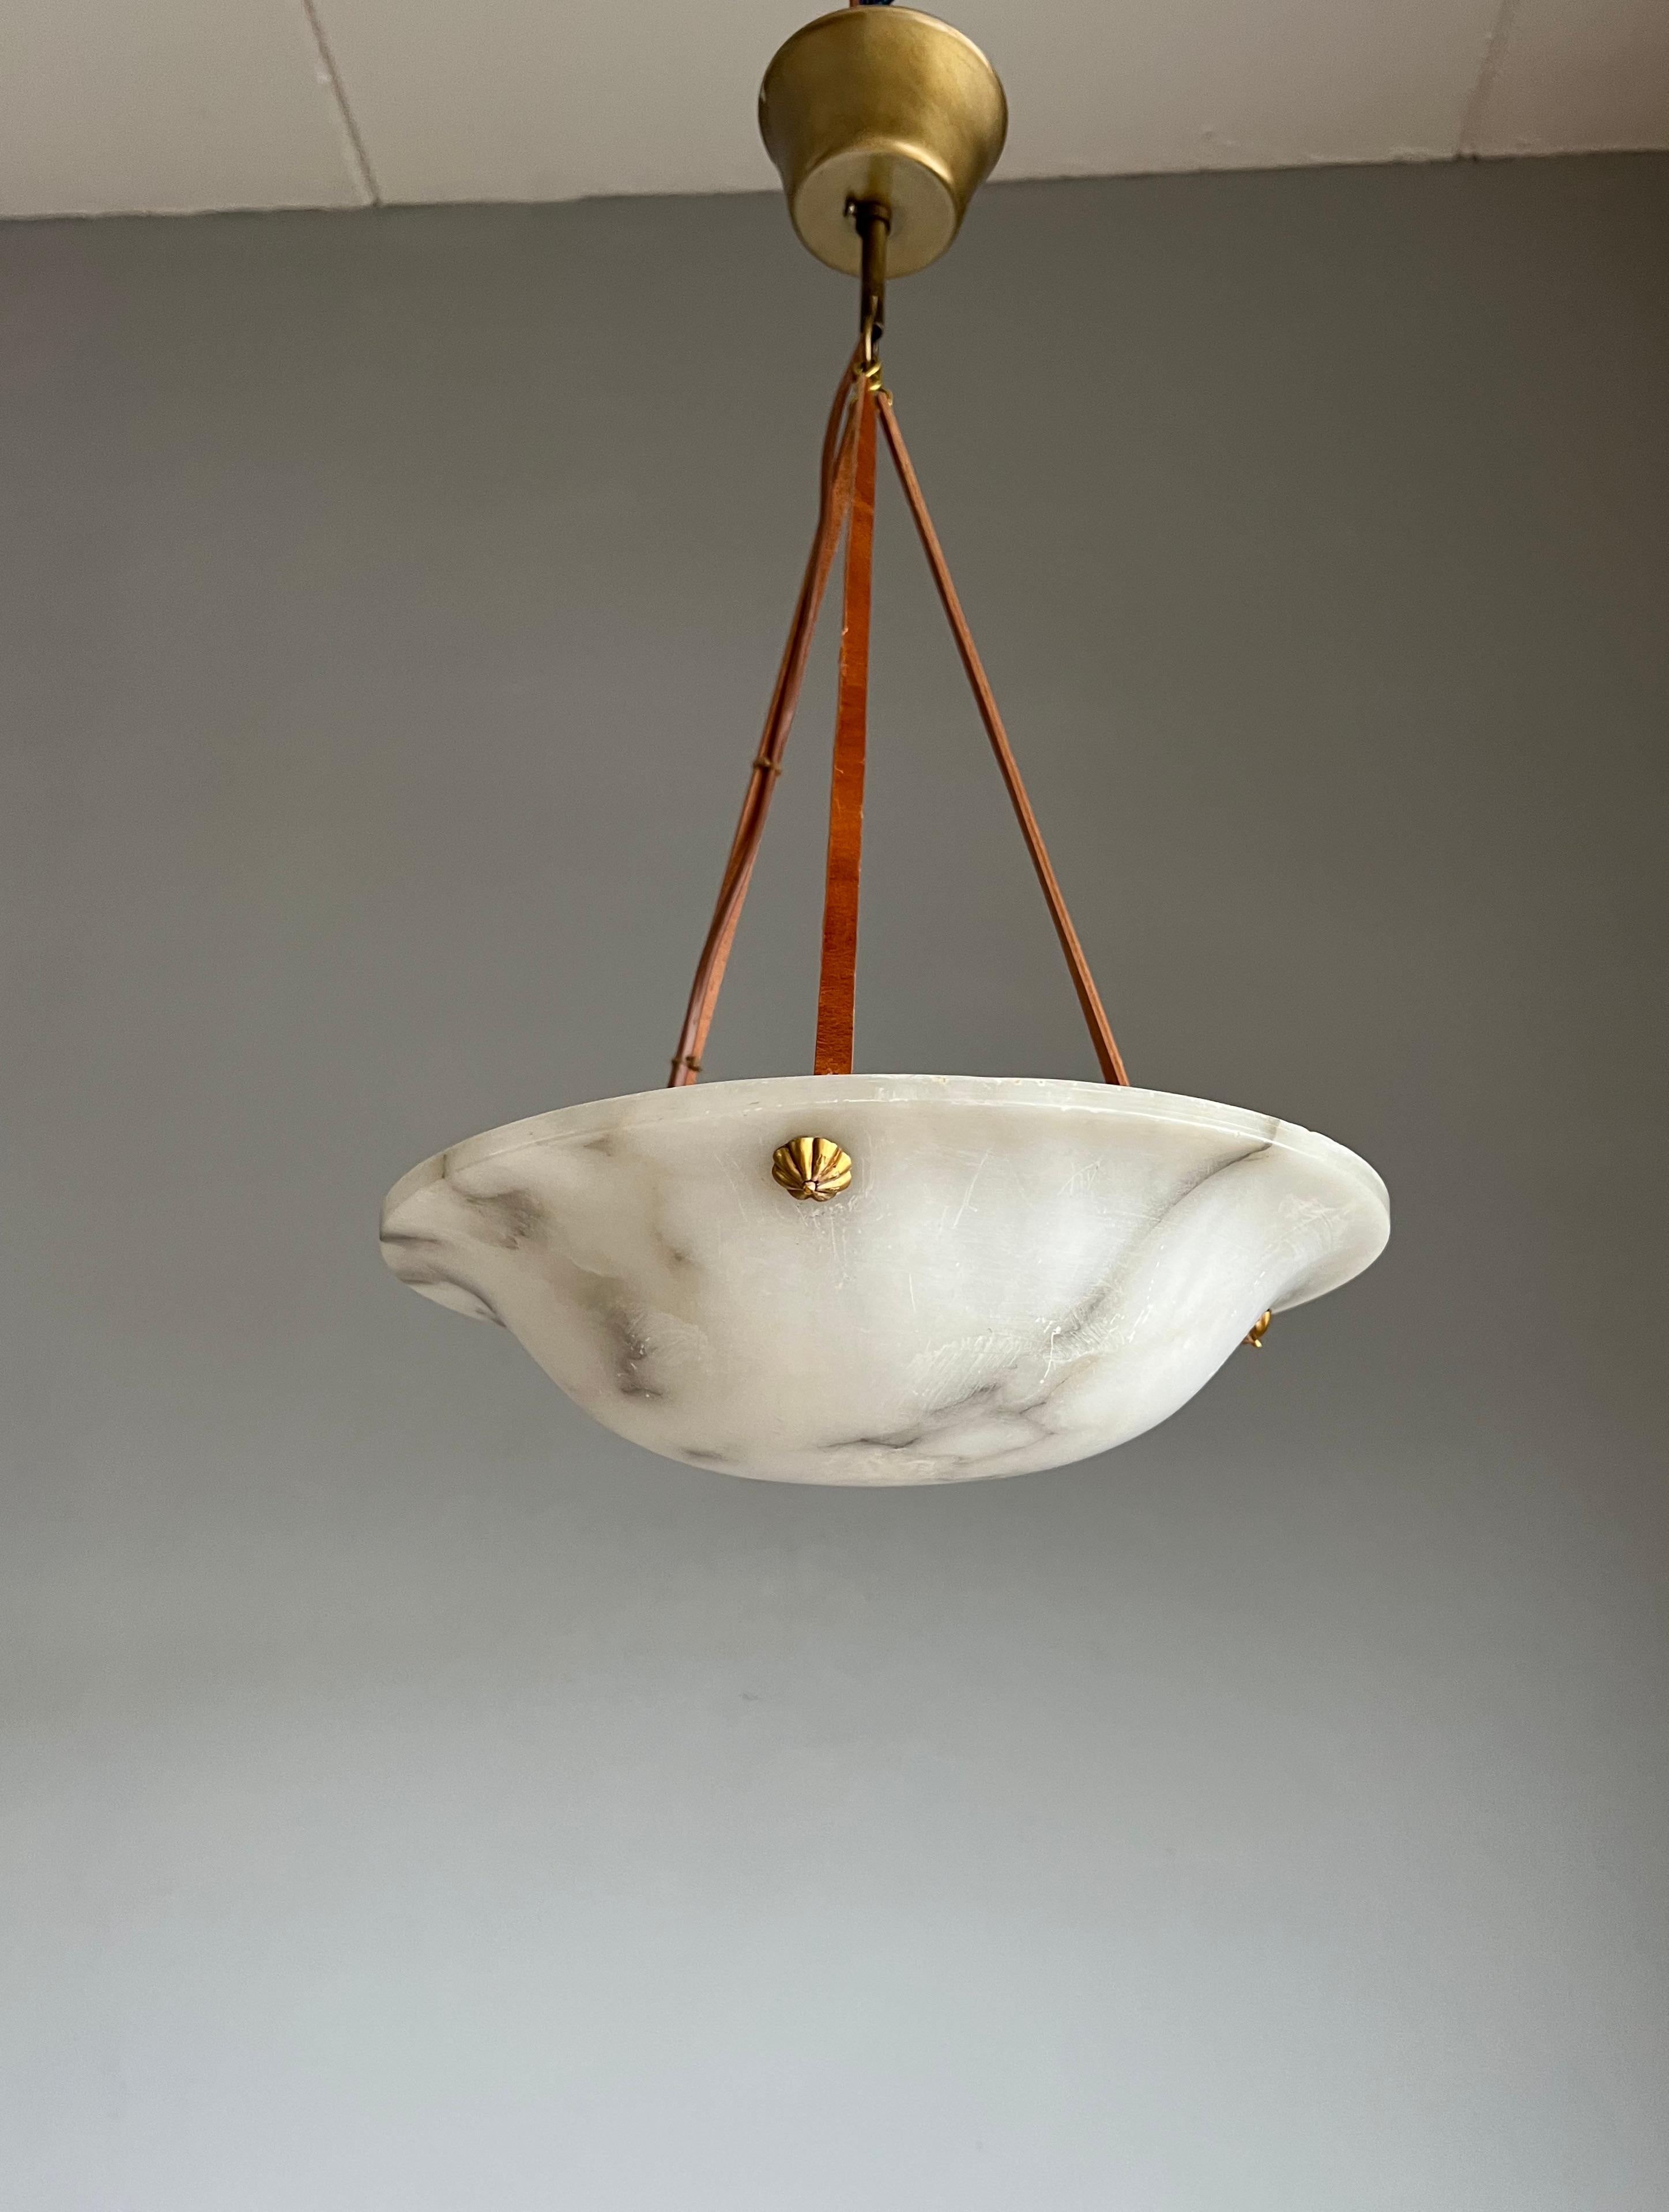 Small & Timeless French Art Deco Alabaster Pendant Light with Leather Rope, 1920 For Sale 1